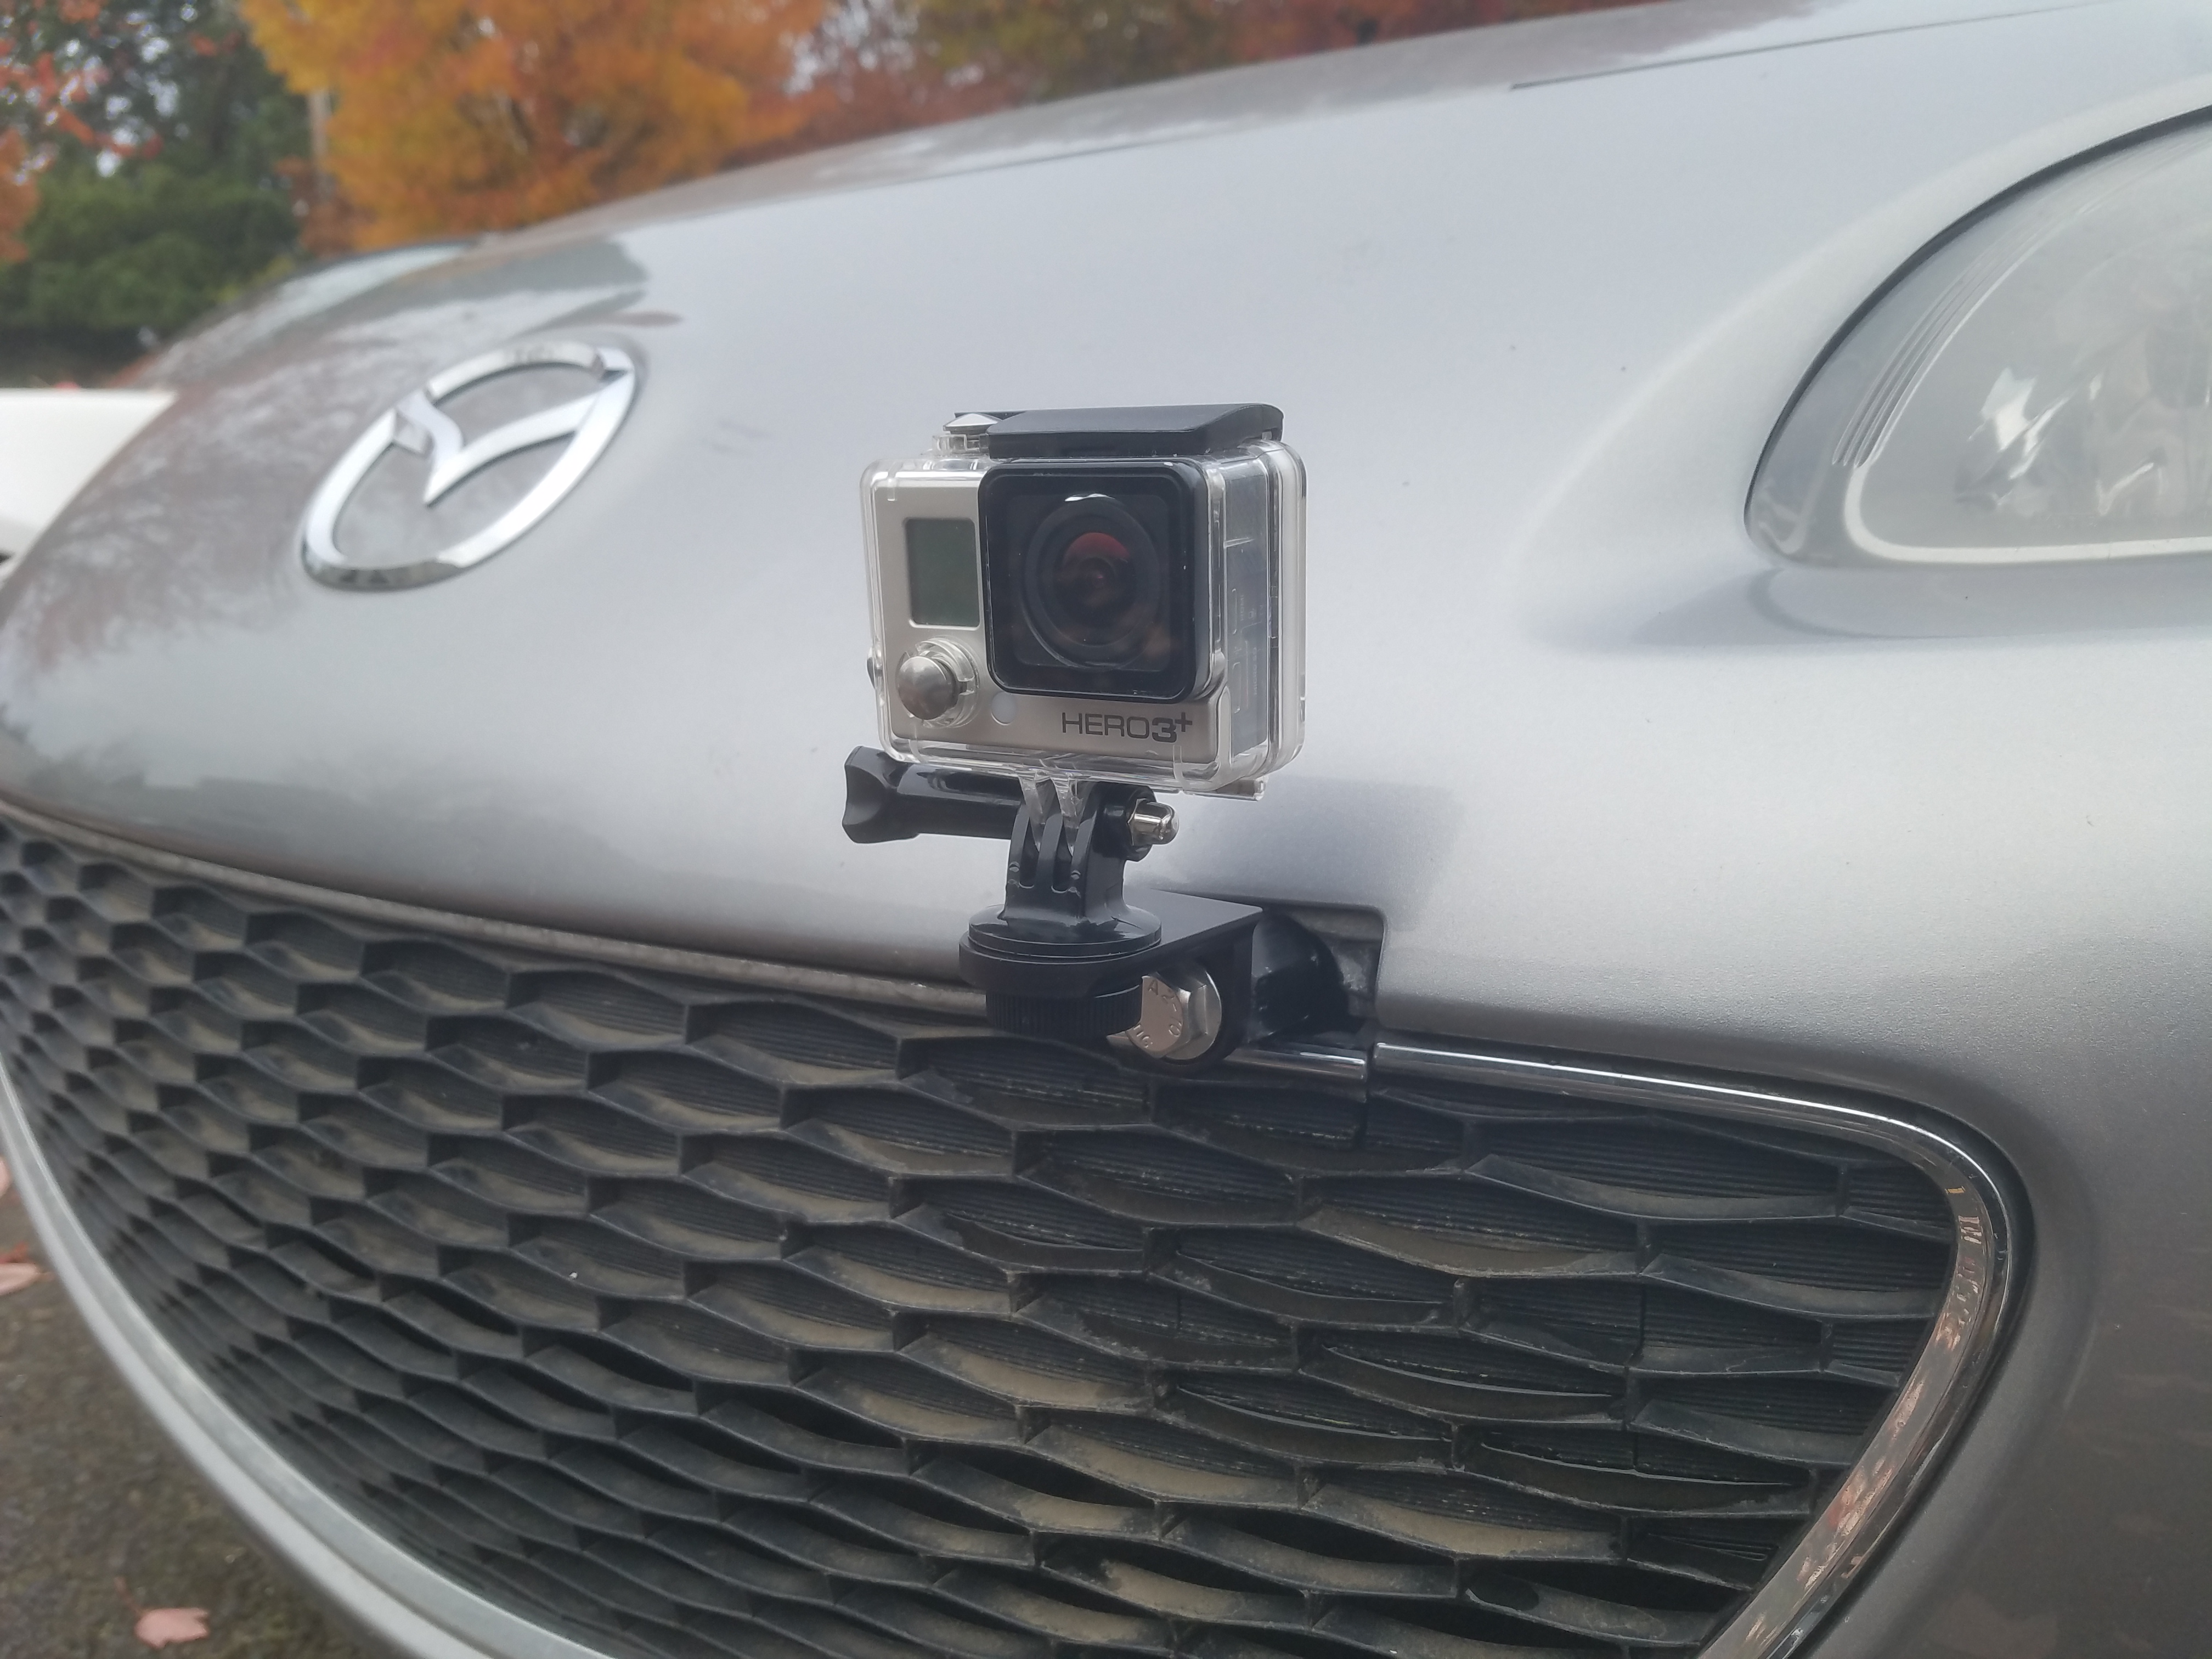 The completed installation of the Action Cam Bumper Mount